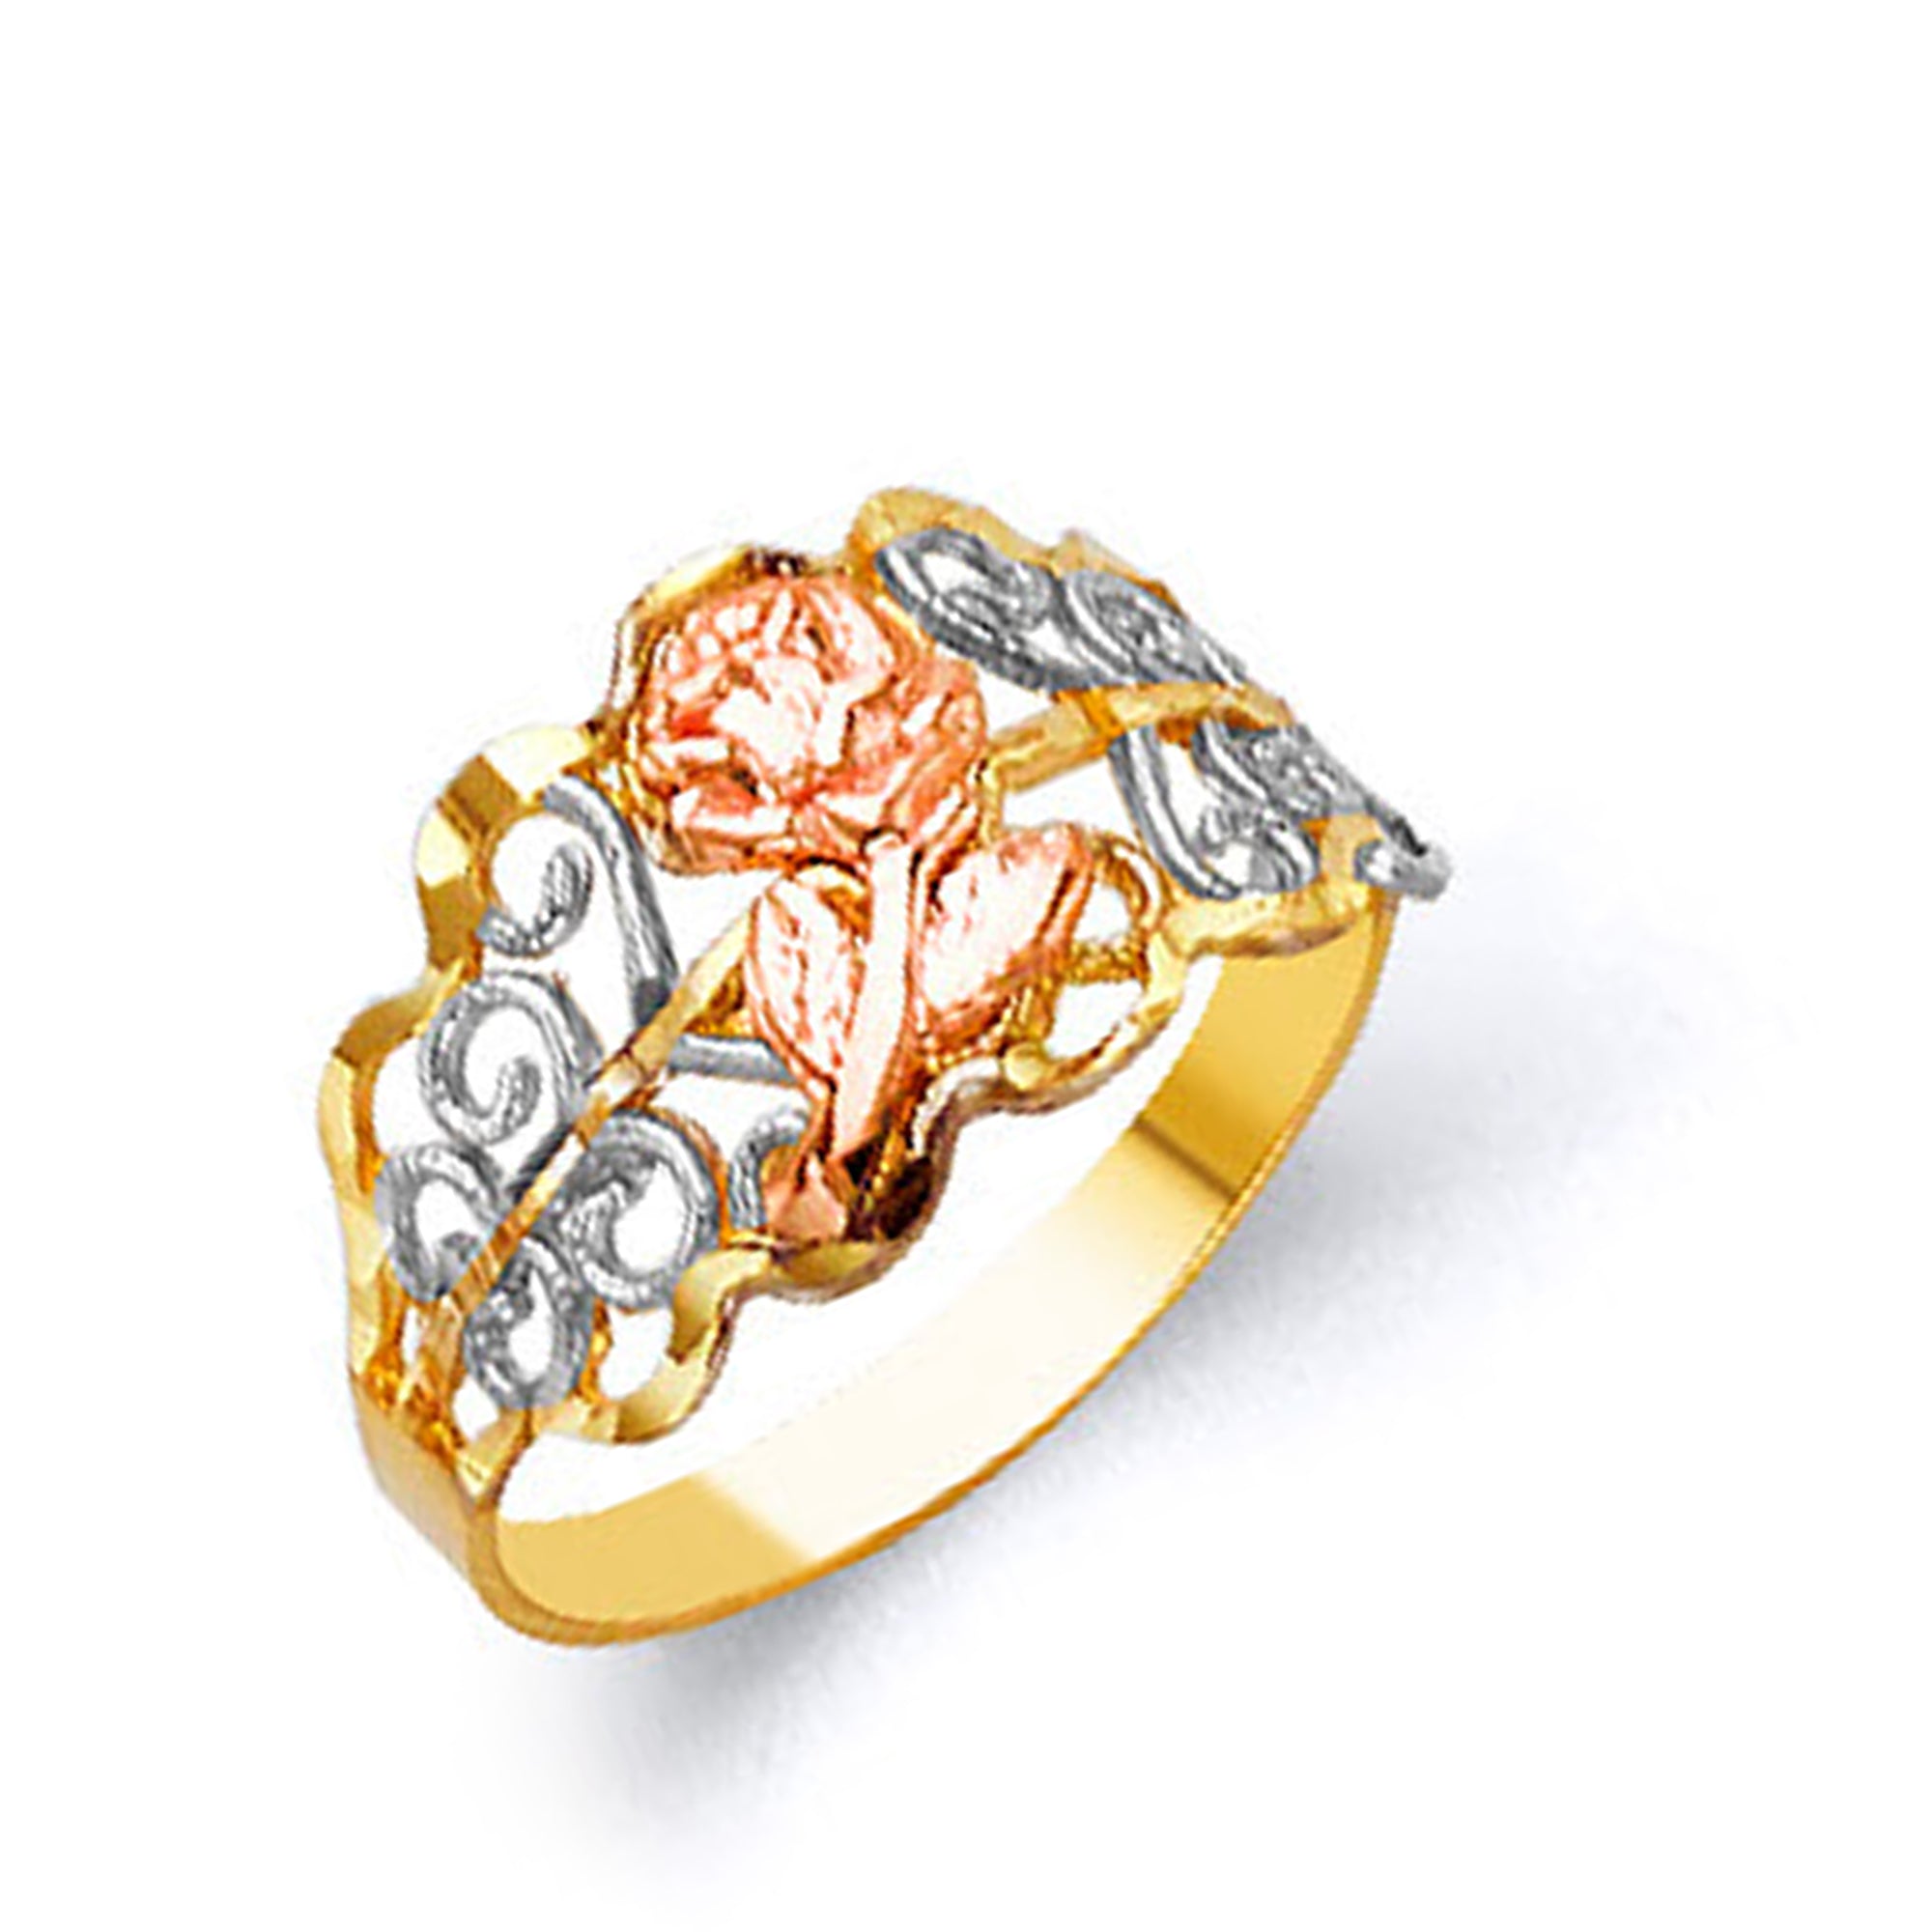 Tricolor Floral Patterned Ring in Solid Gold